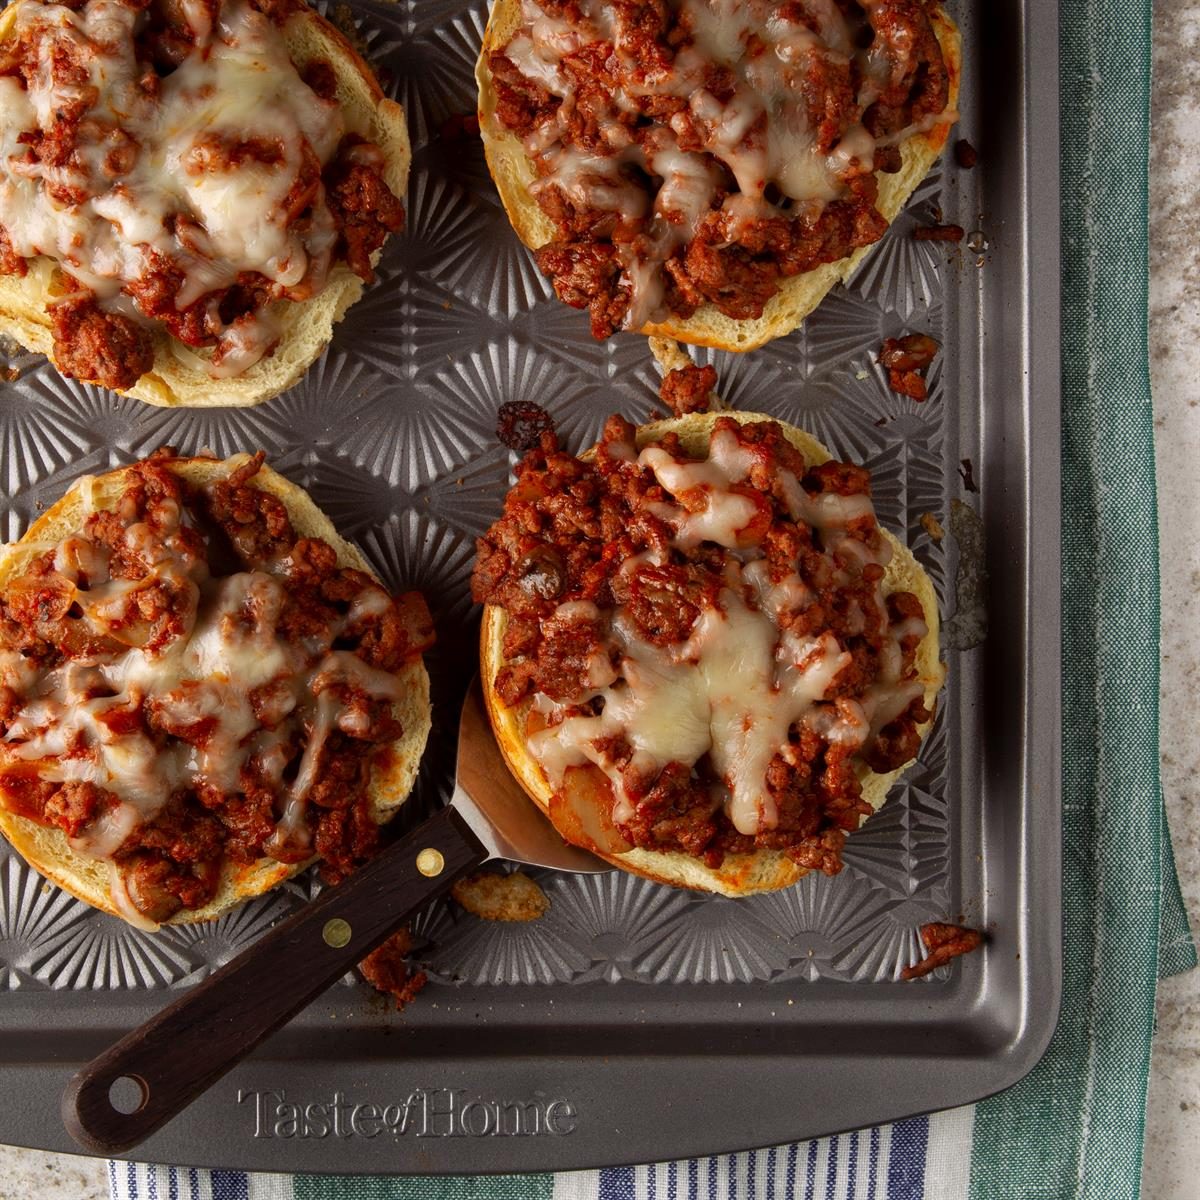 Open Faced Pizza Burgers Exps Ft20 13459 F 0306 1 10